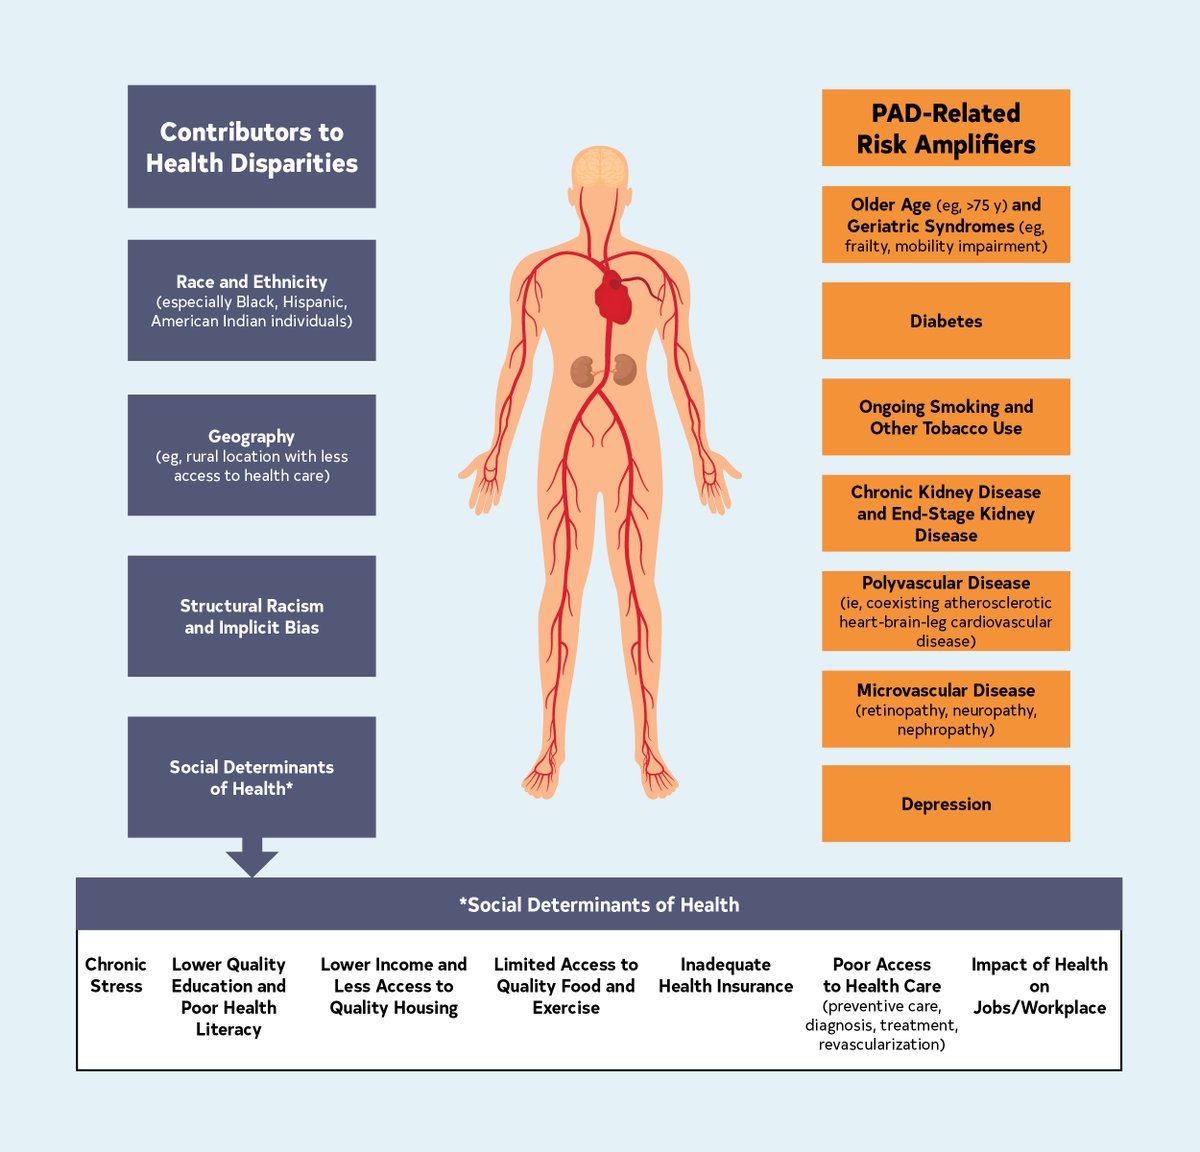 PAD is a common cardiovascular disease that affects approx. 10 to 12 million people in the US. The 2024 Guideline for the Management of PAD was published today in @CircAHA ✍🏽:@heatherlgornik 📷: Health Disparities & PAD-Related Risk Amplifiers Increase Risk of MACE & MALE